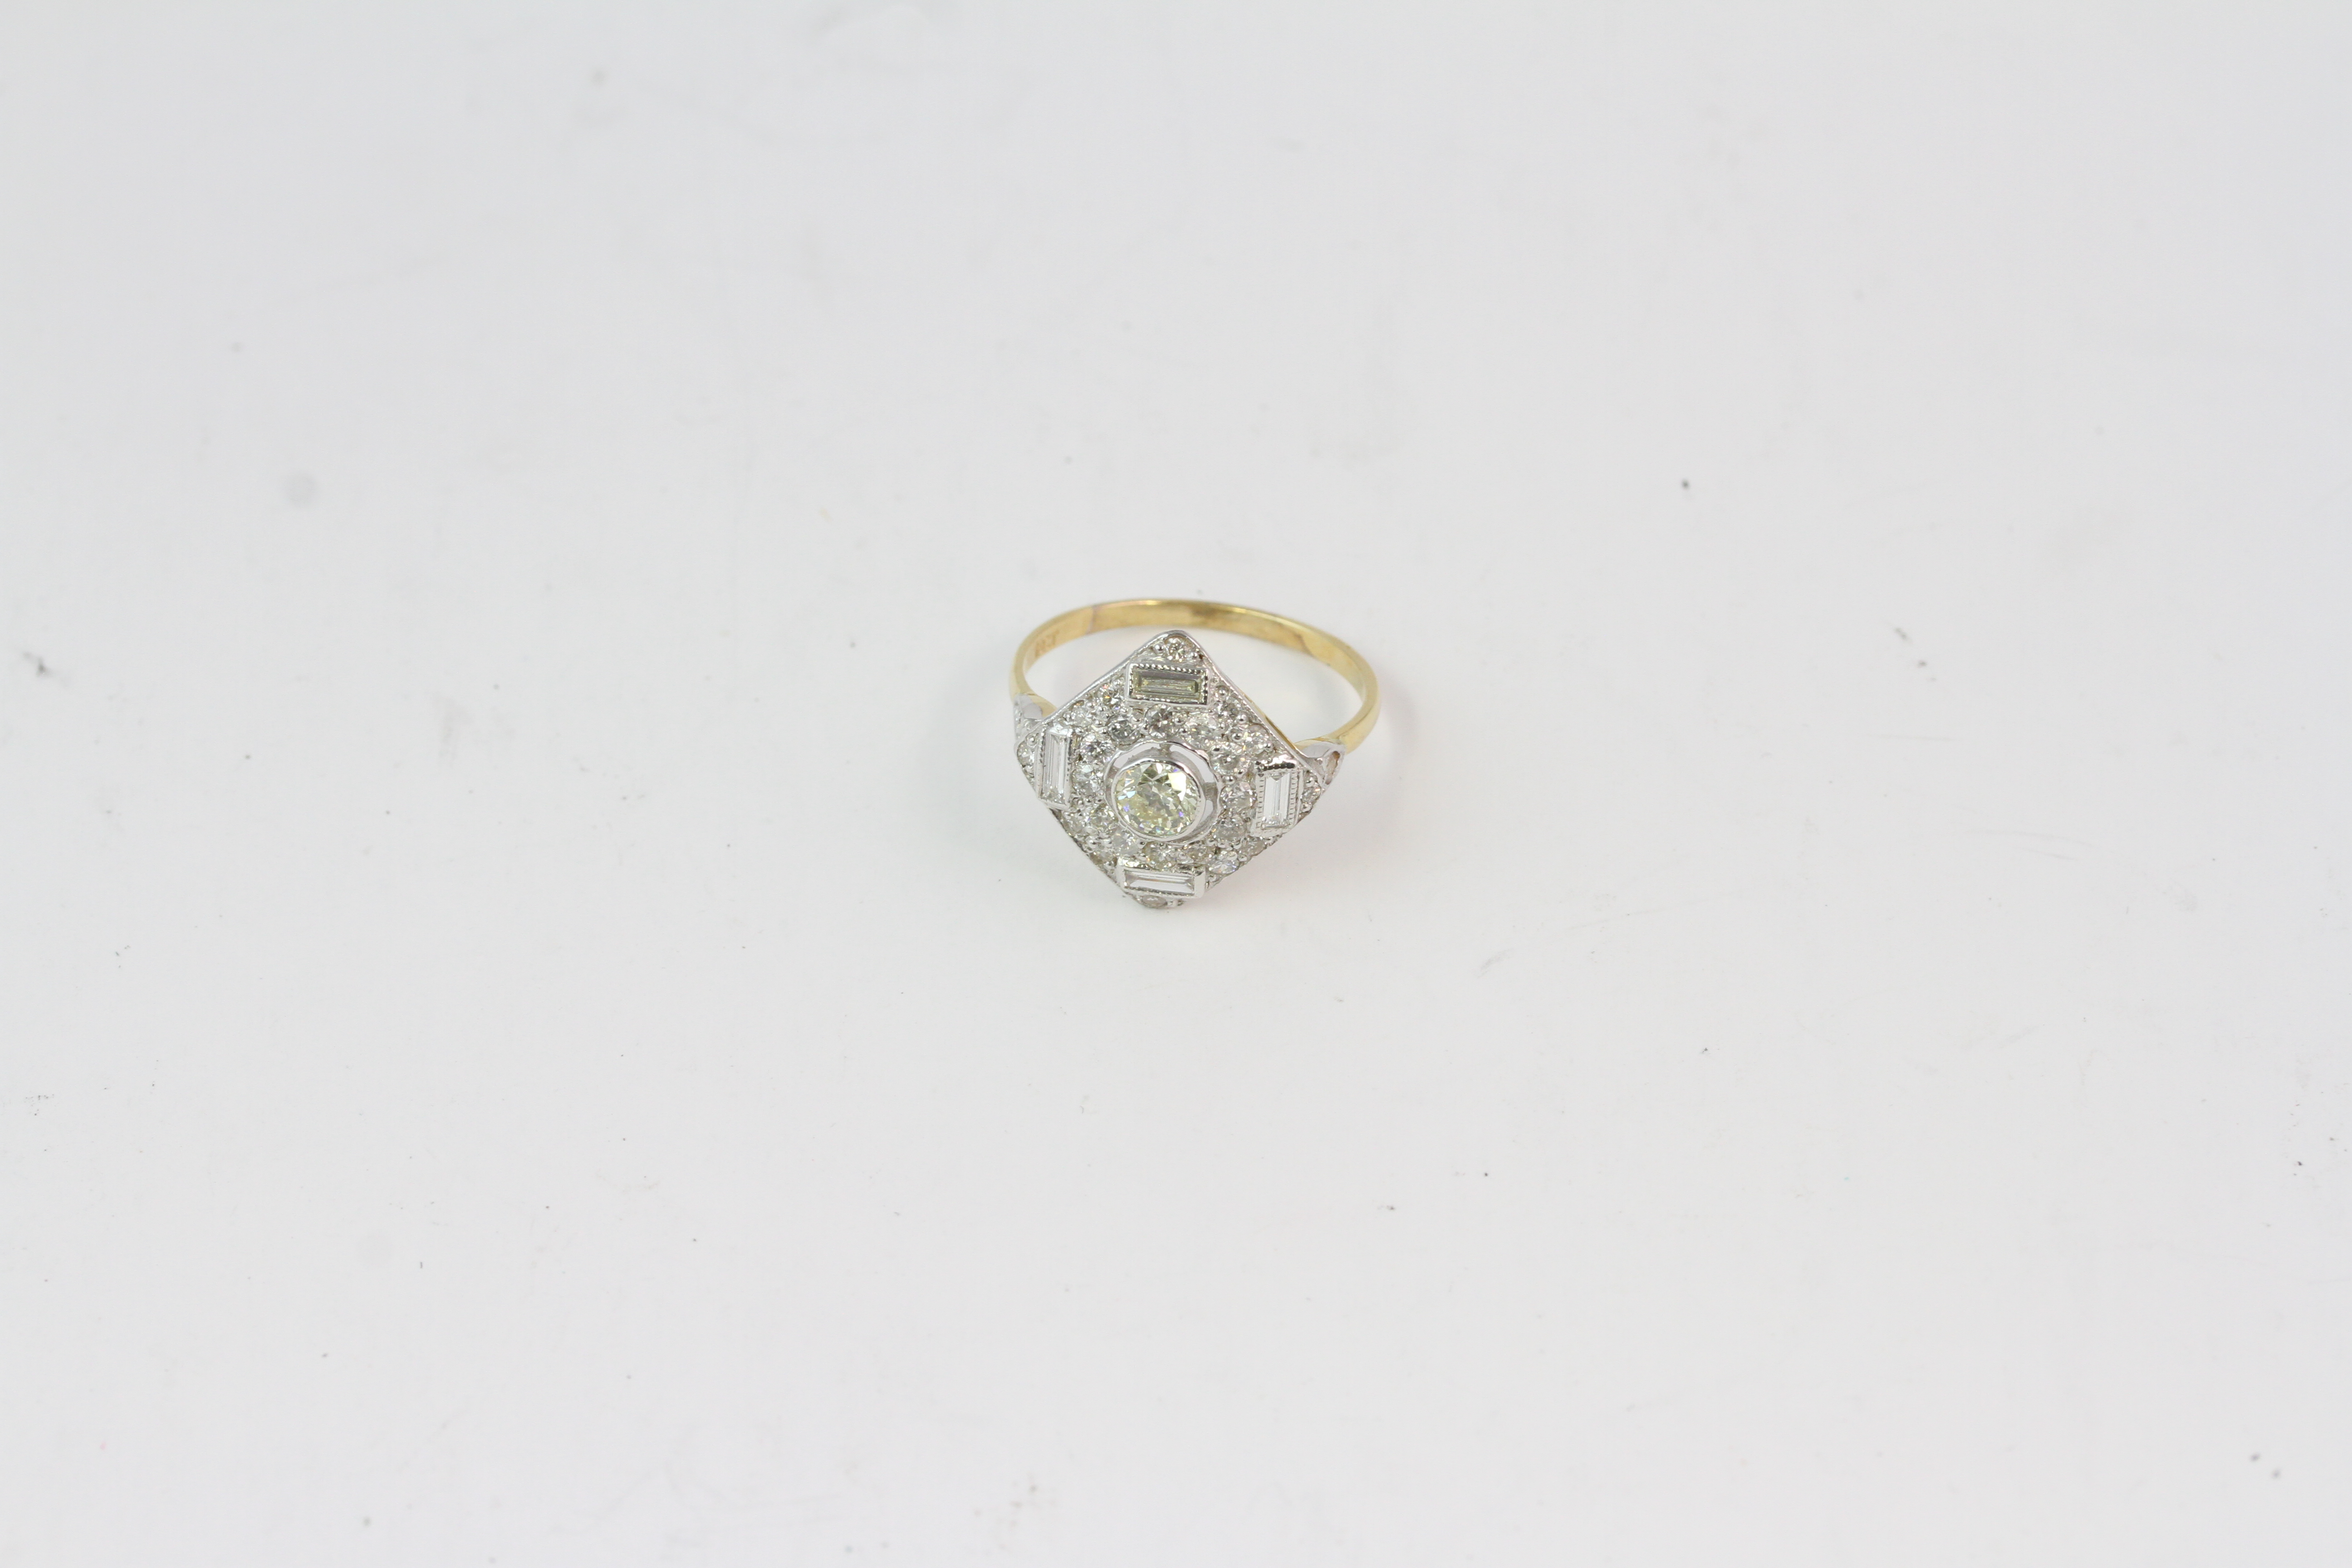 18YG tablet ring with 4 baguettes at compass points, centre diamond in a bezel TDW 1ct